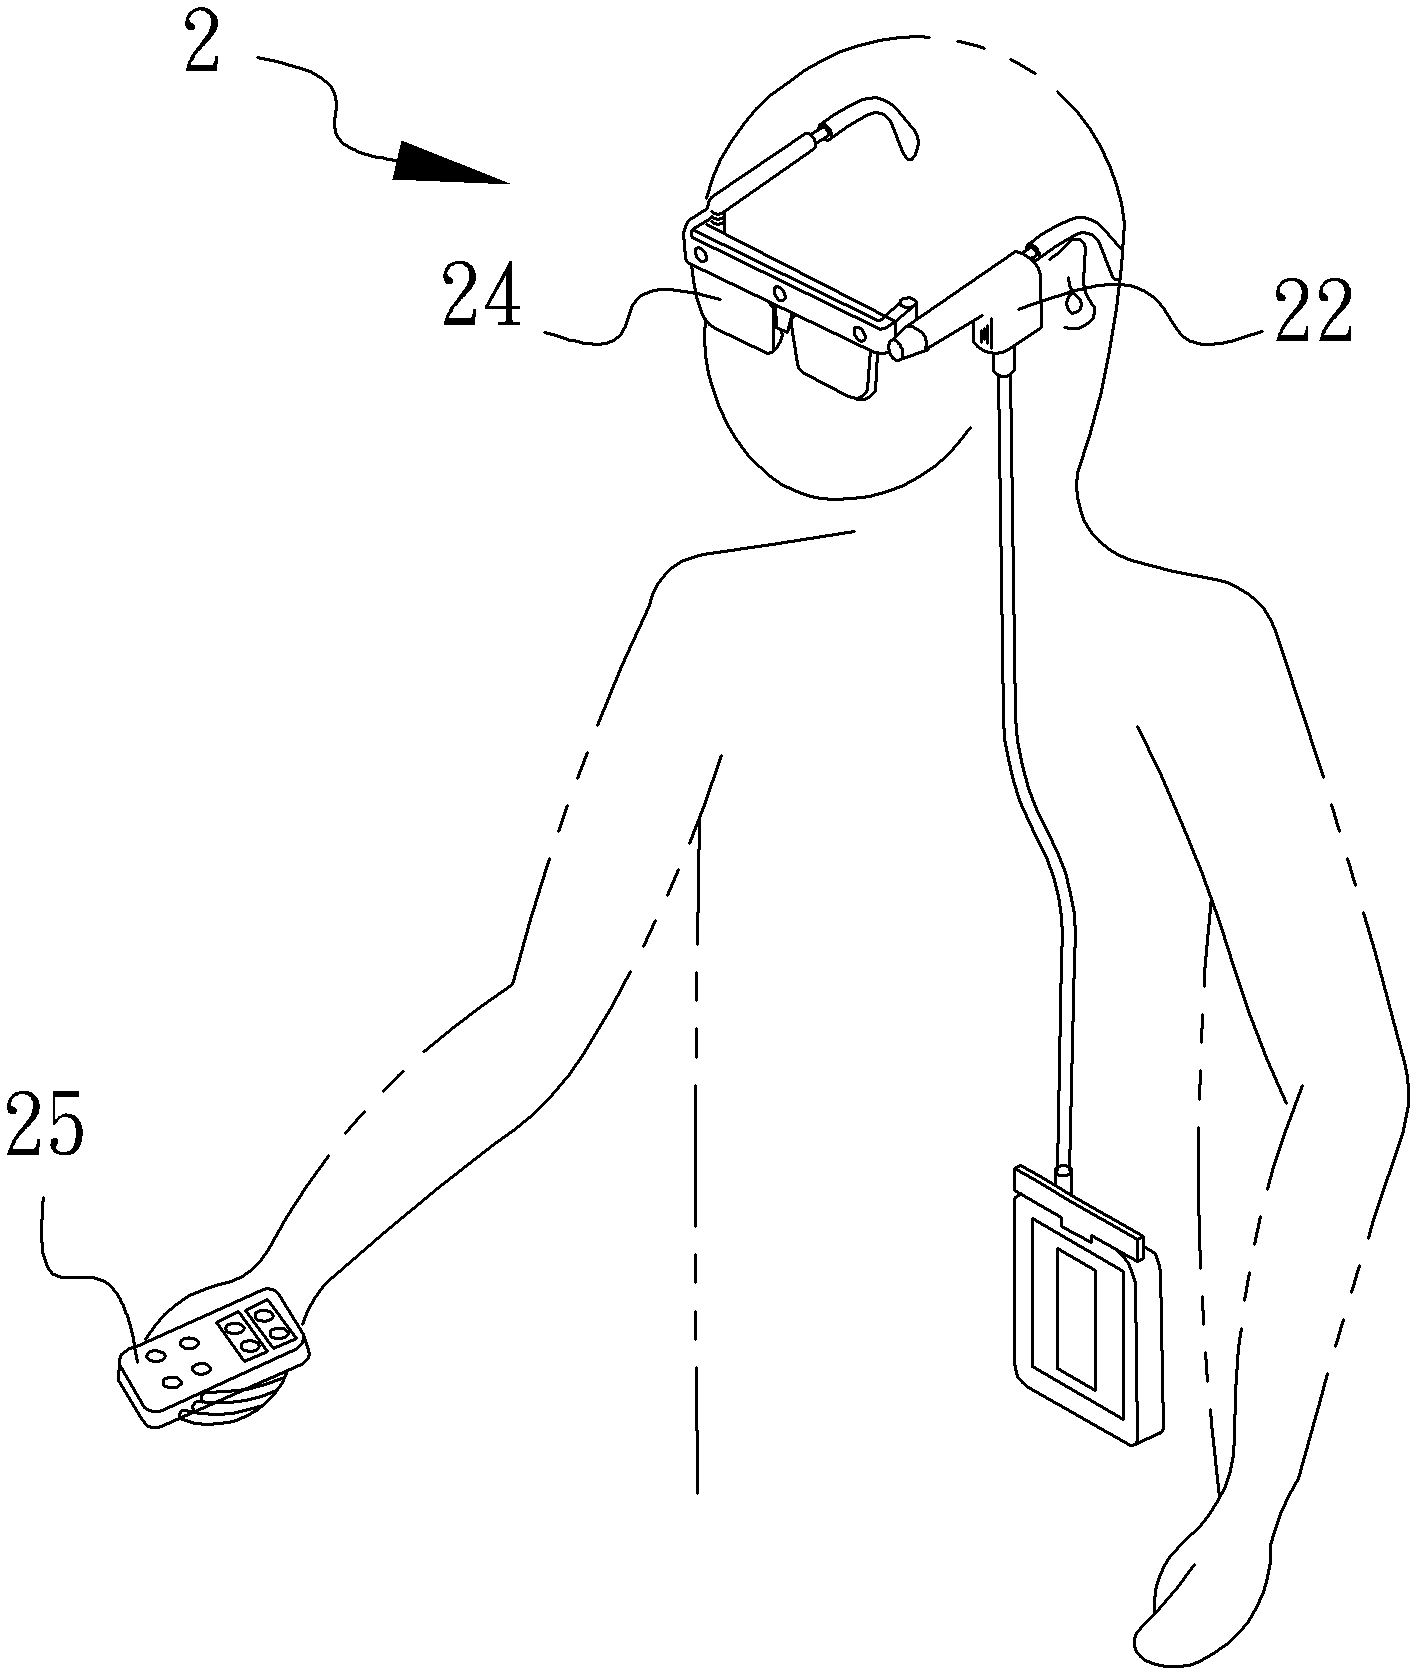 Head-mounted image acquisition analysis display system and method thereof